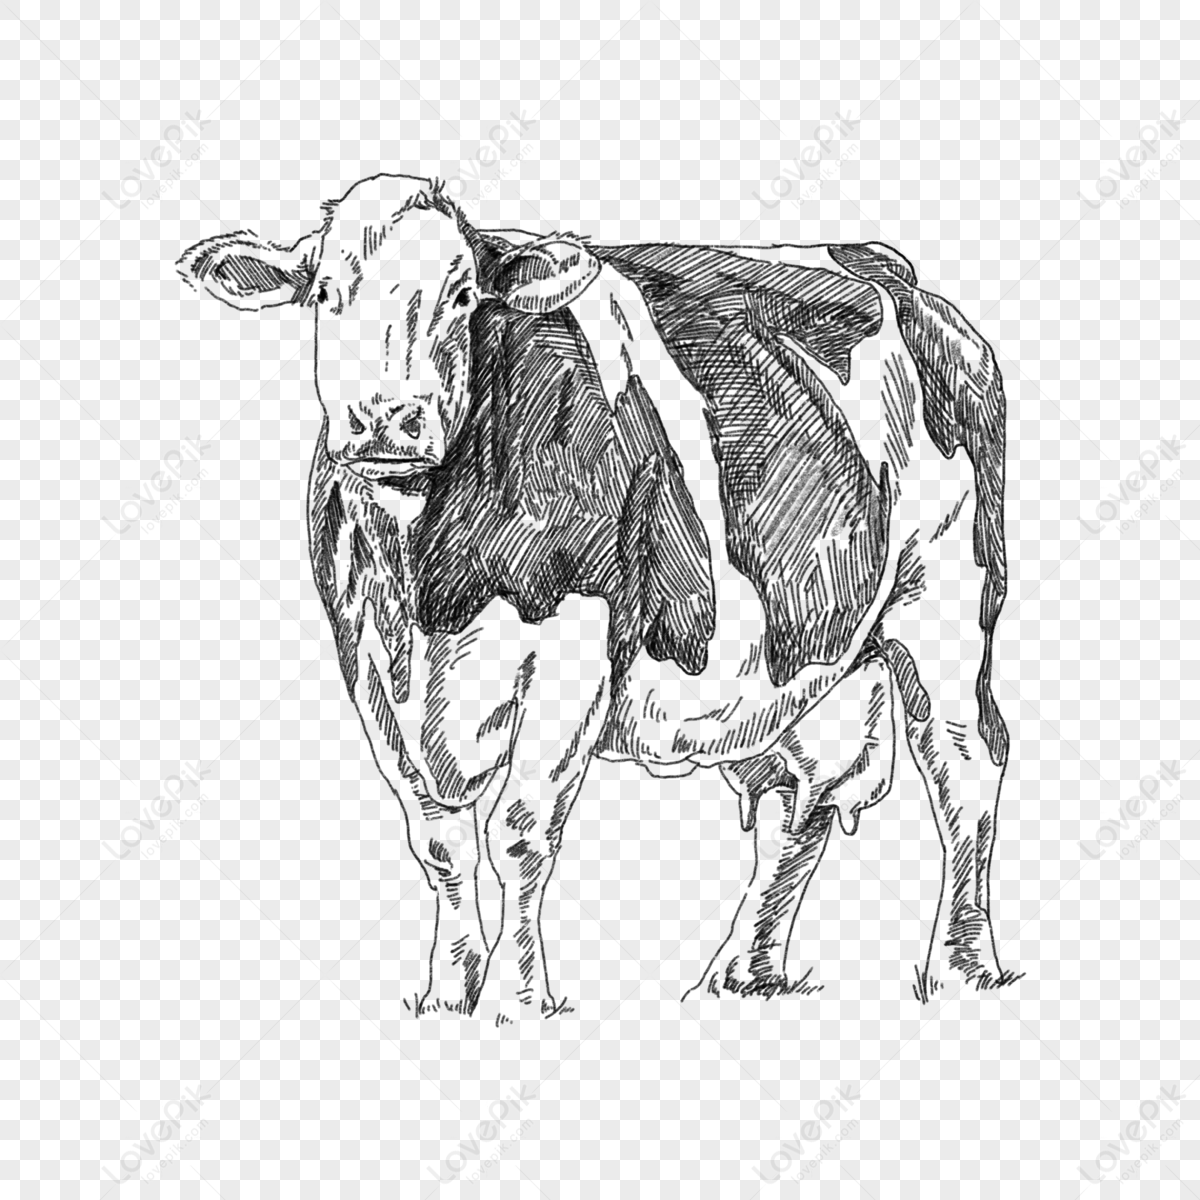 www.shutterstock.com/image-vector/sketches-cow-dra...